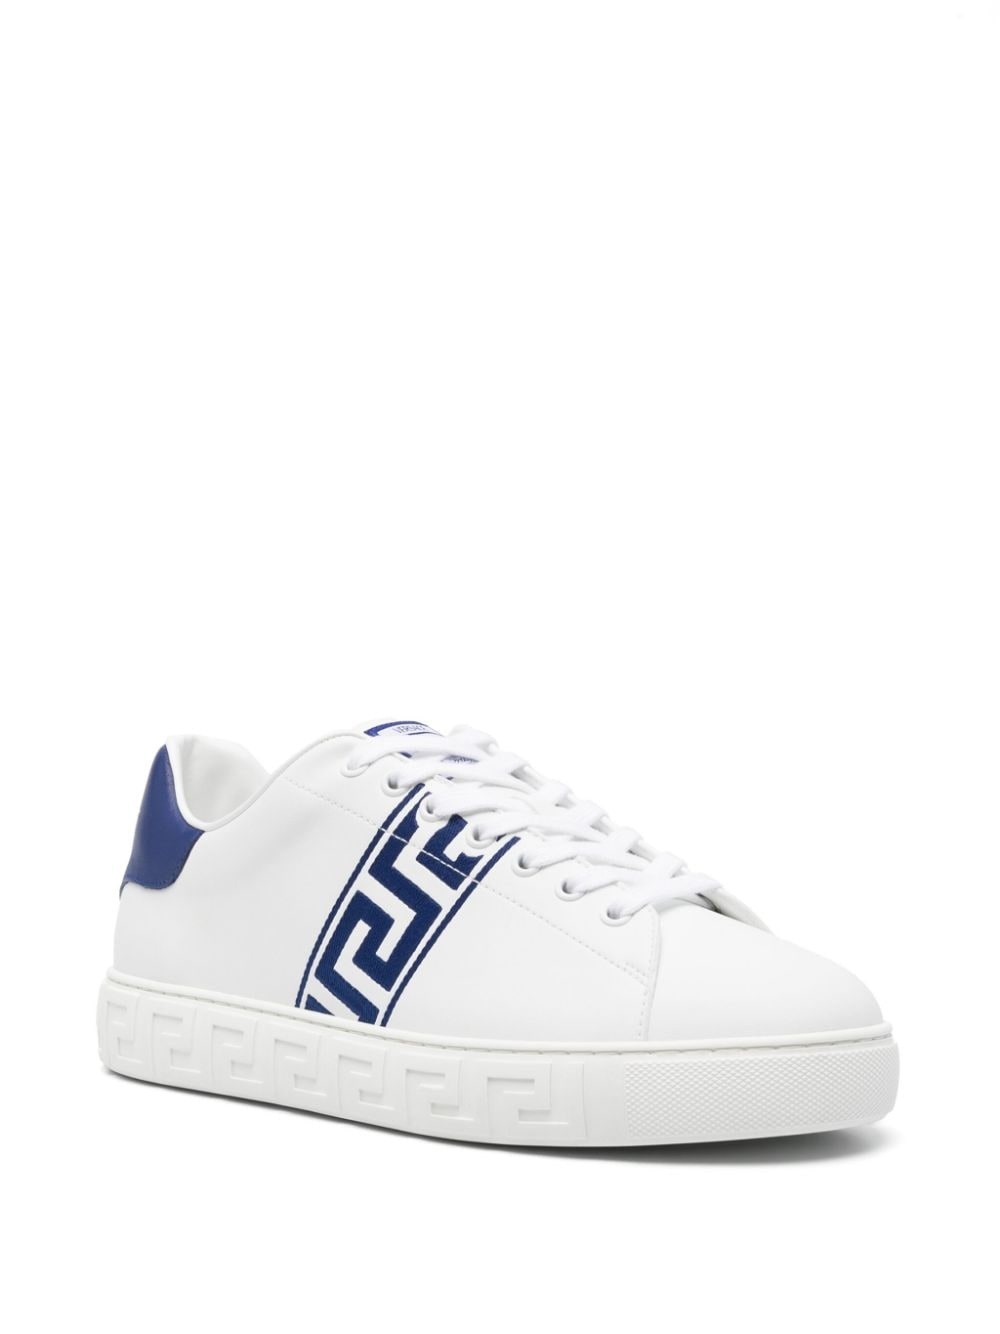 Greca-embroidery leather sneakers - 2